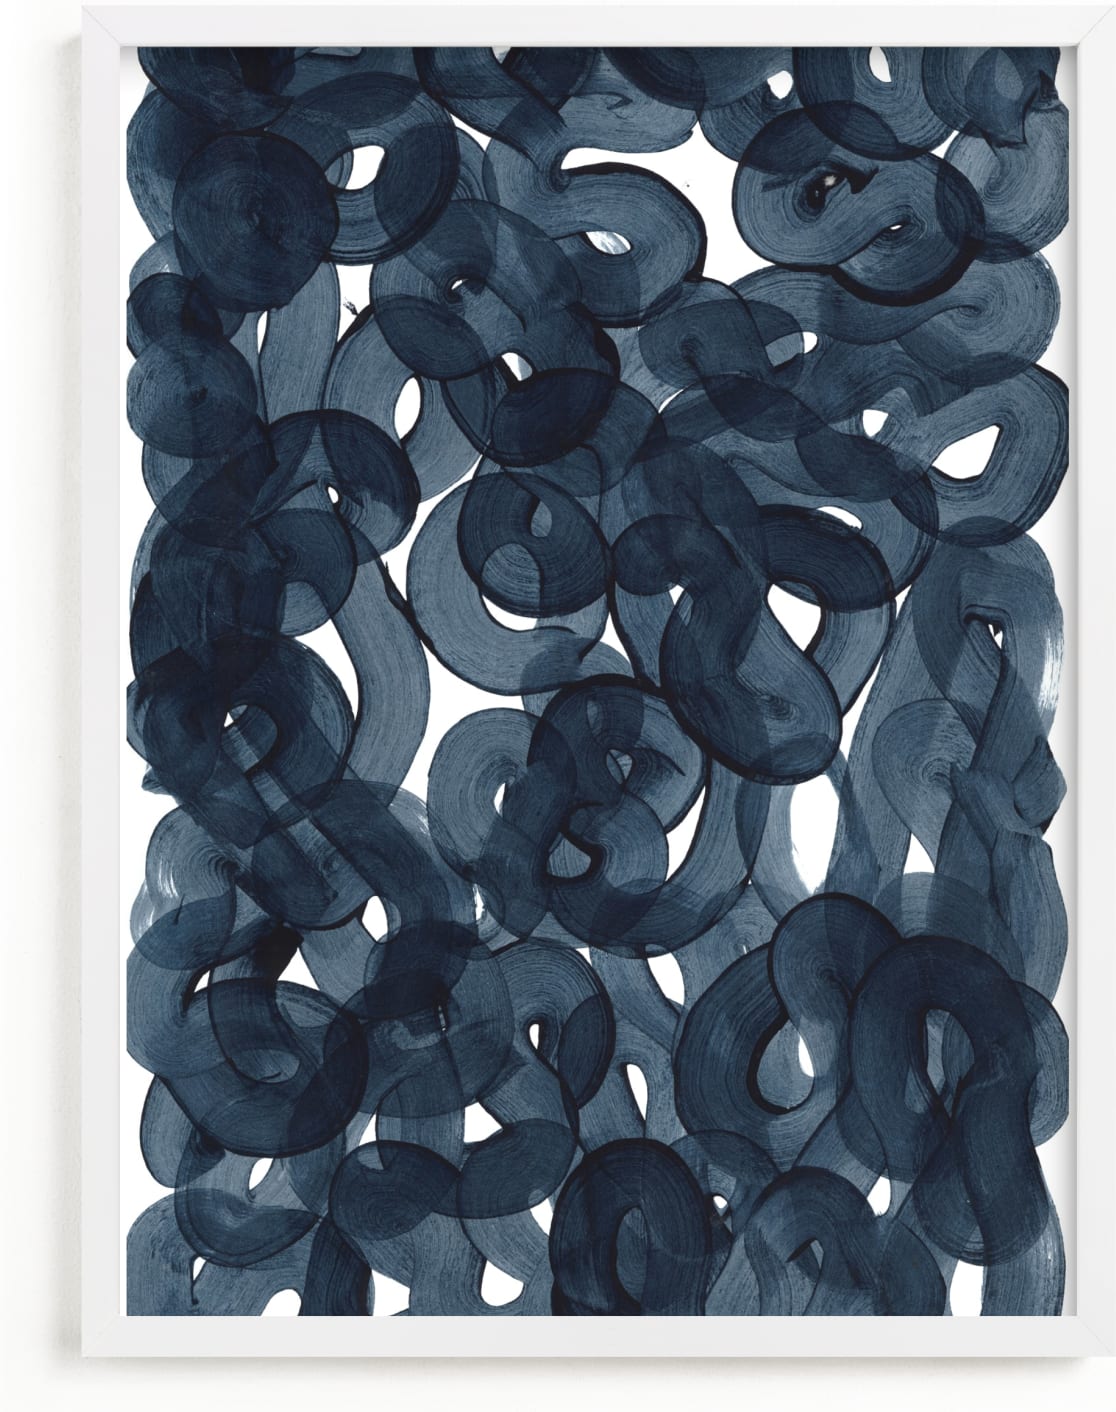 This is a blue art by Erin McCluskey Wheeler called Indigo Ink.